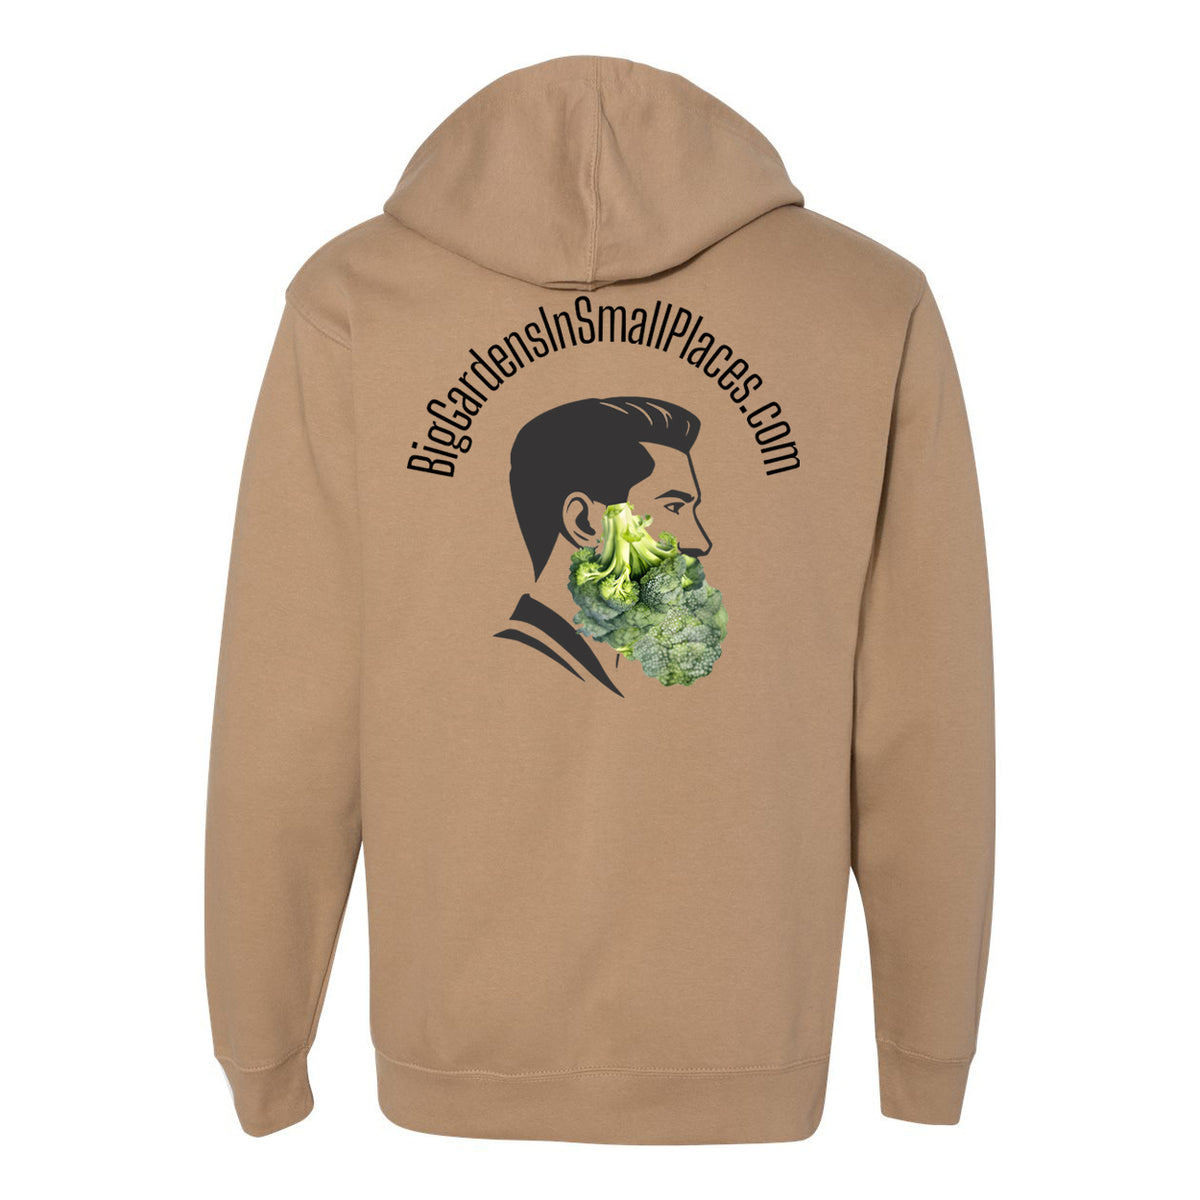 Big Gardens In Small Places Logo Hoodie- Mens / Unisex